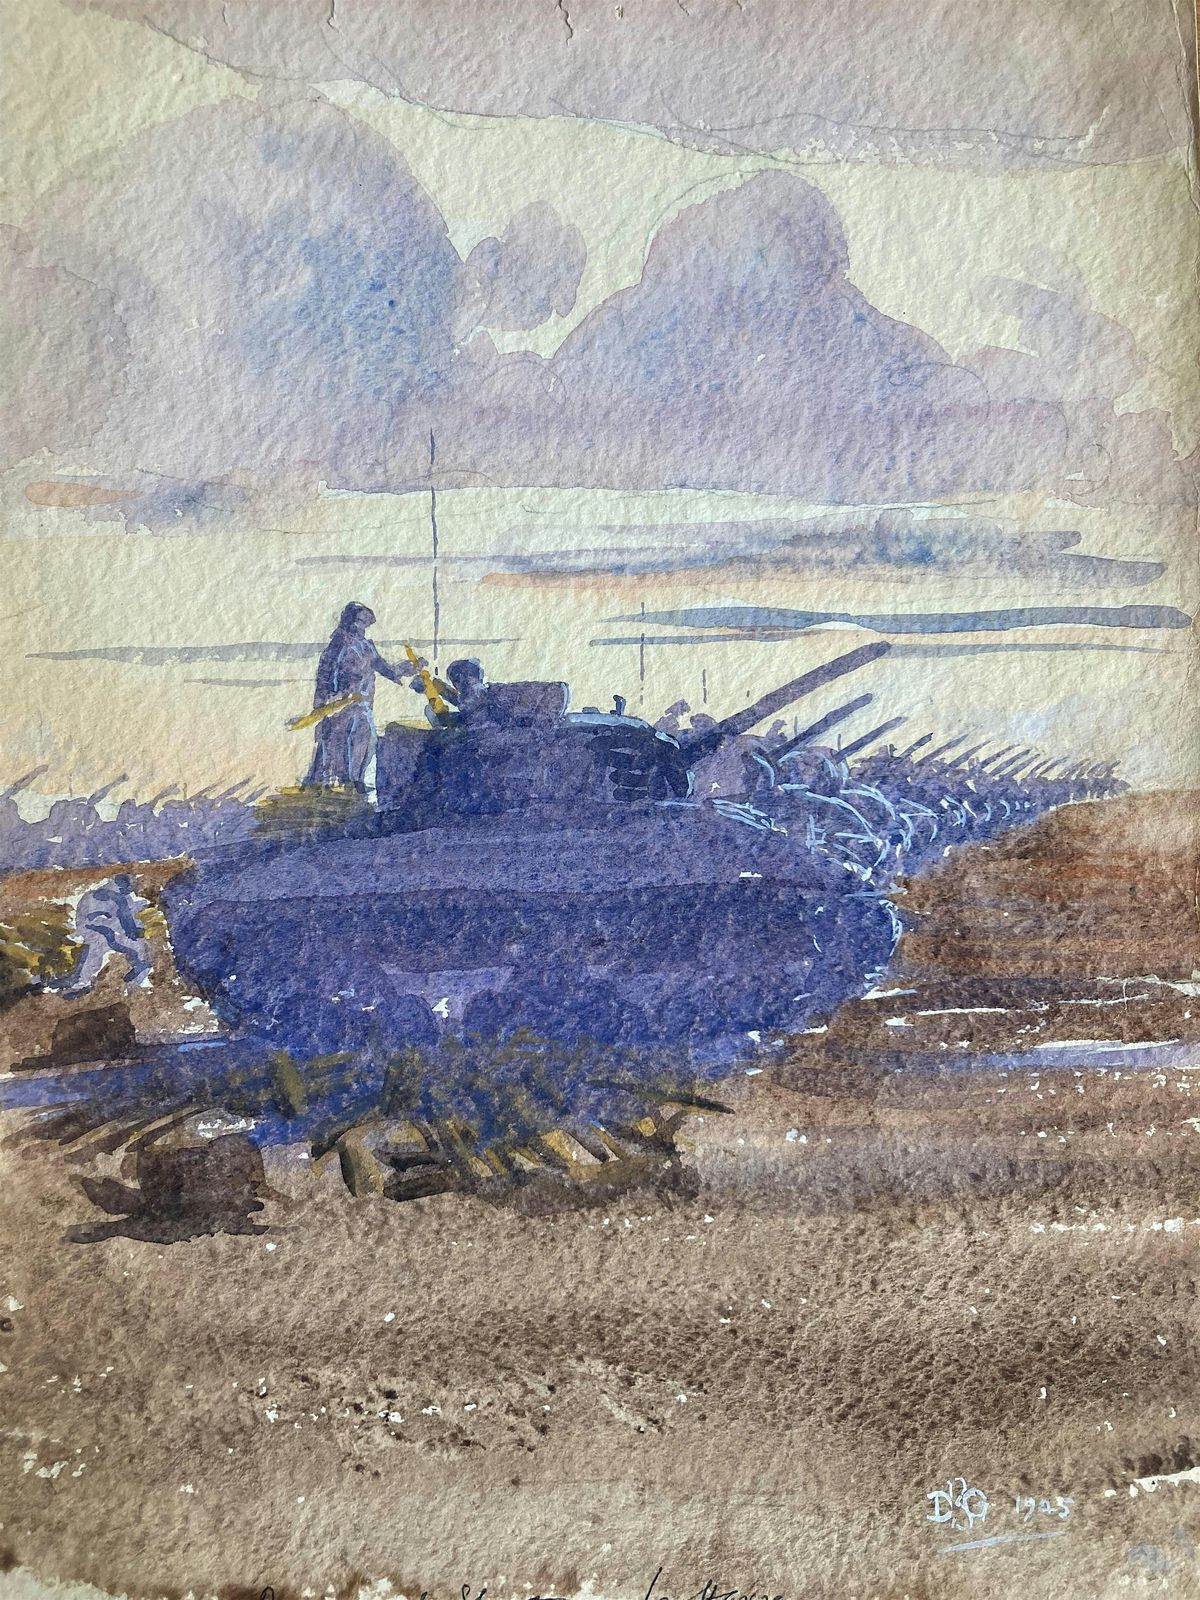 D-Day Commemorative Art History Lecture - Painting to Remember